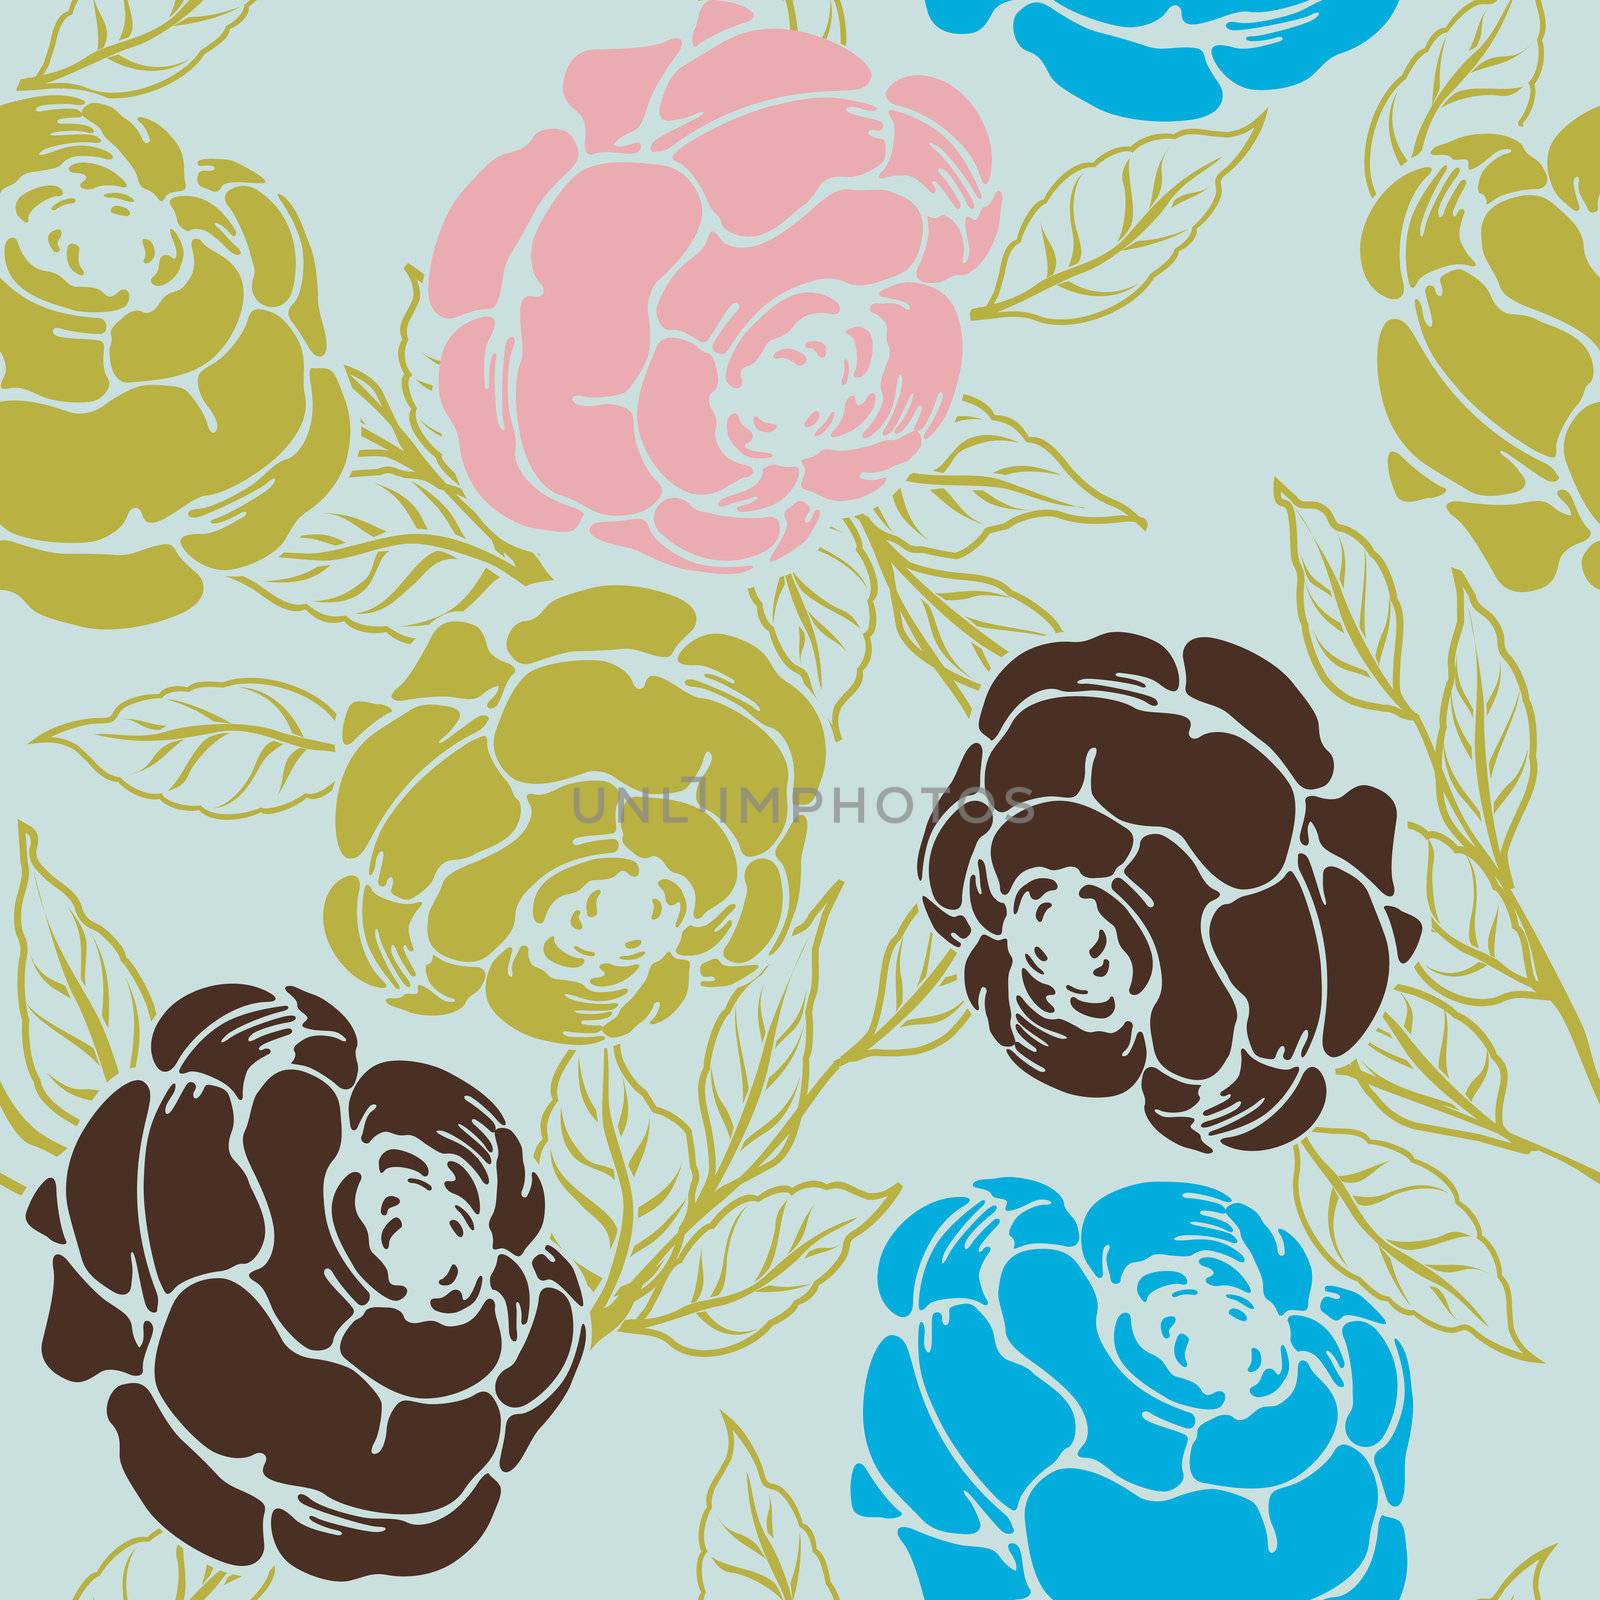 Seamless background with roses, pattern